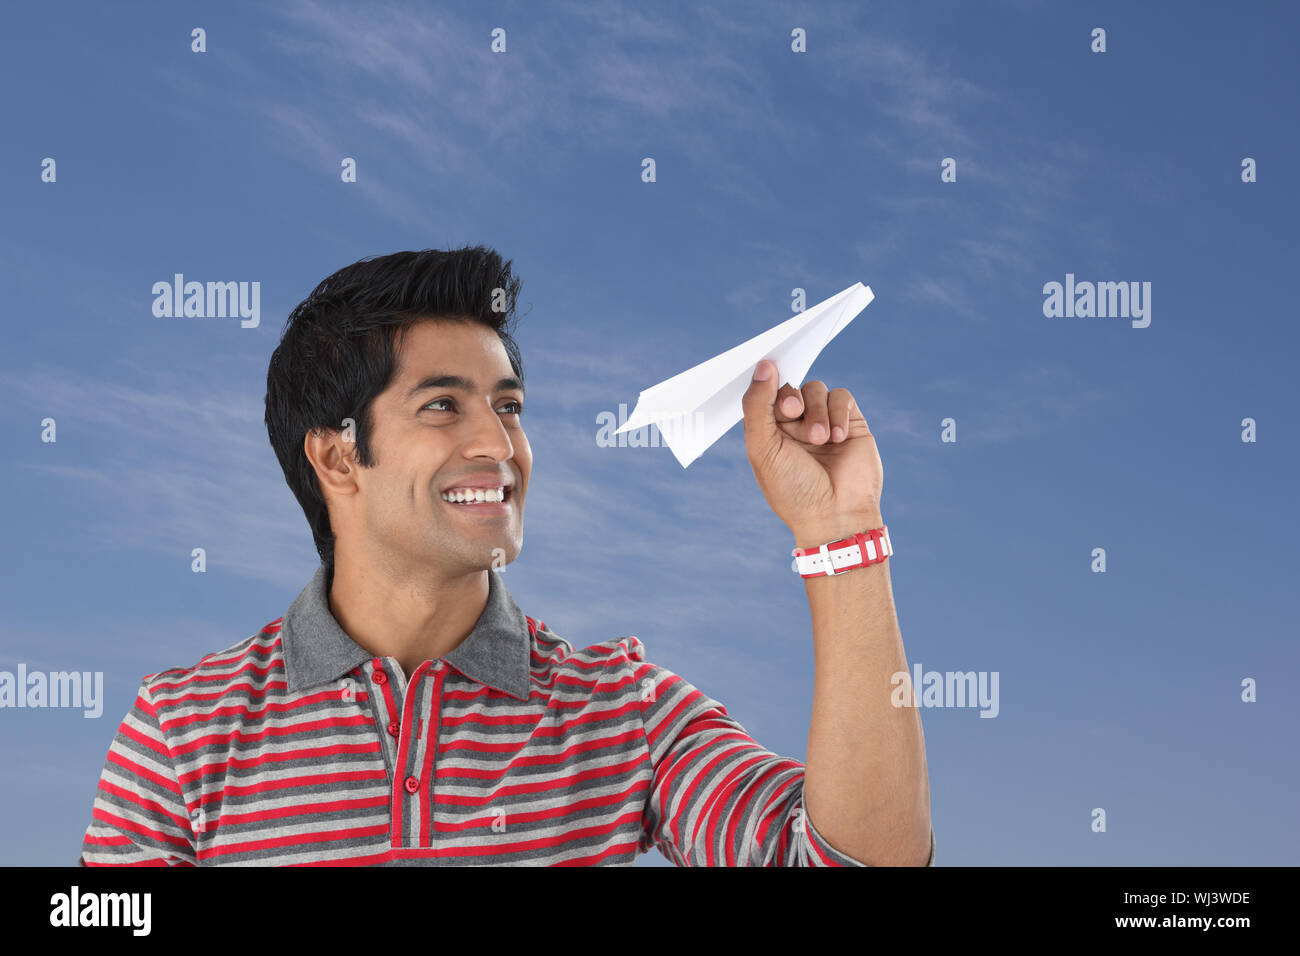 Young man throwing a paper airplane and smiling Stock Photo